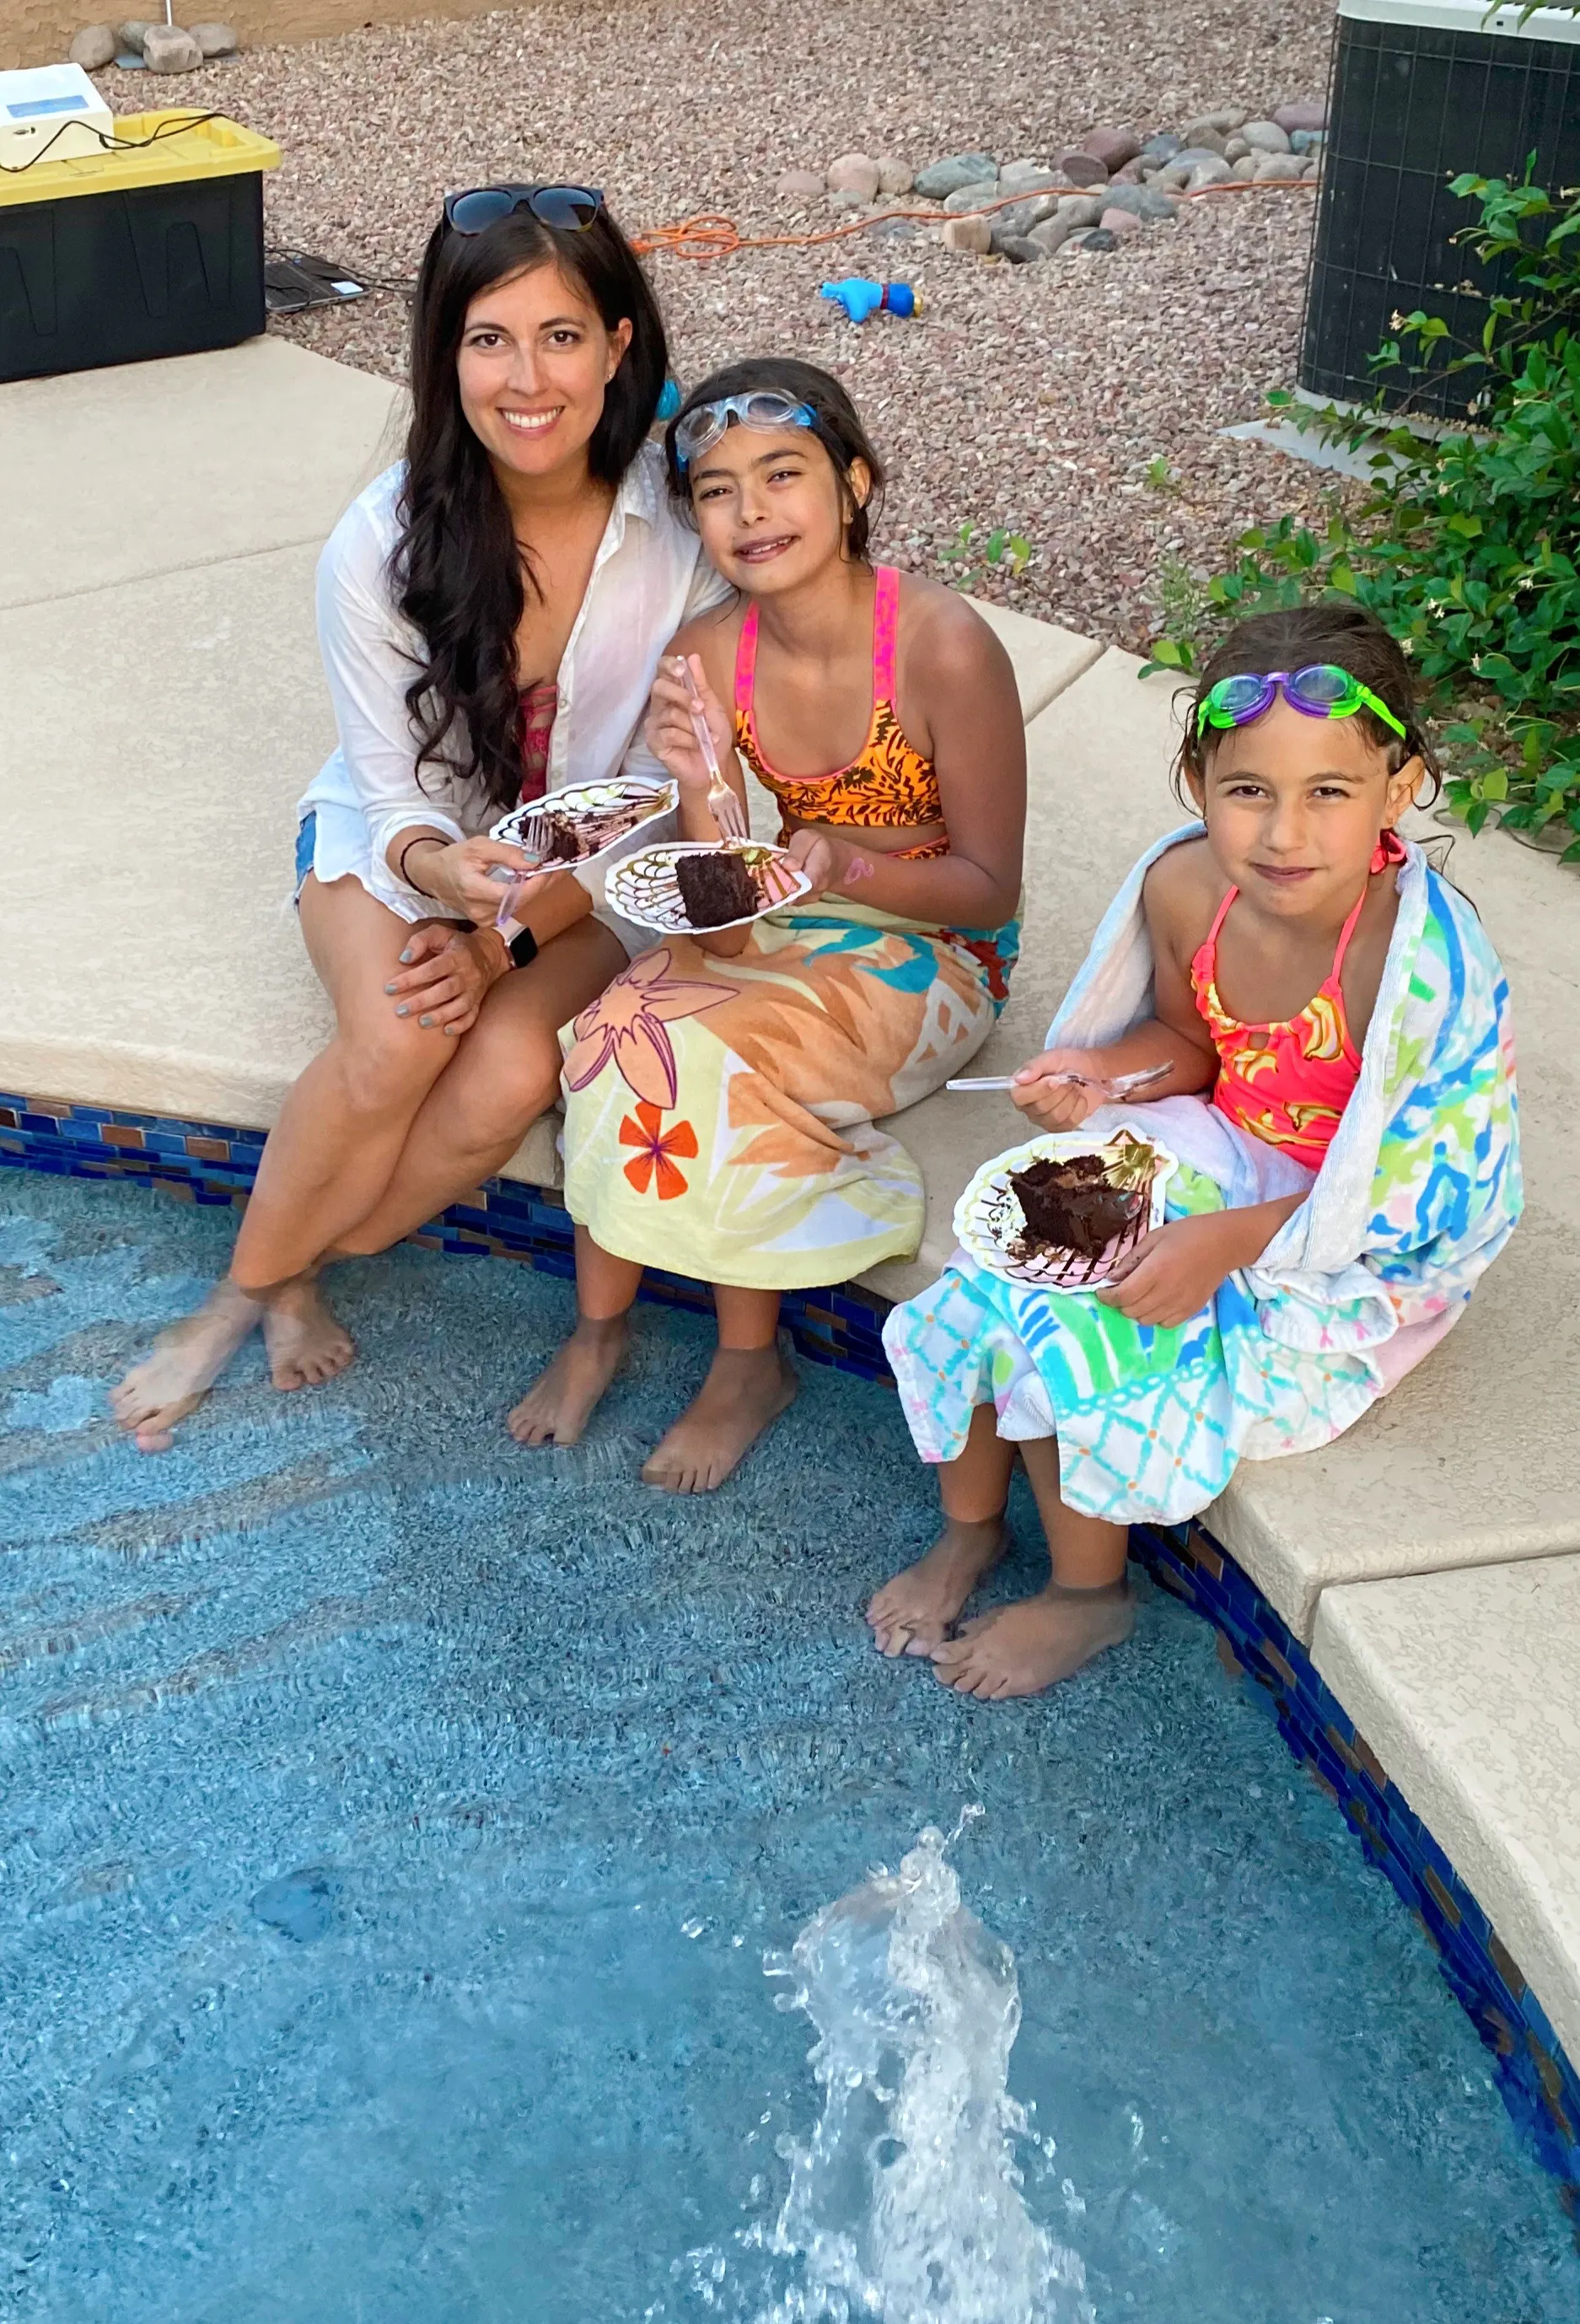 Eating cake with my babies by the pool